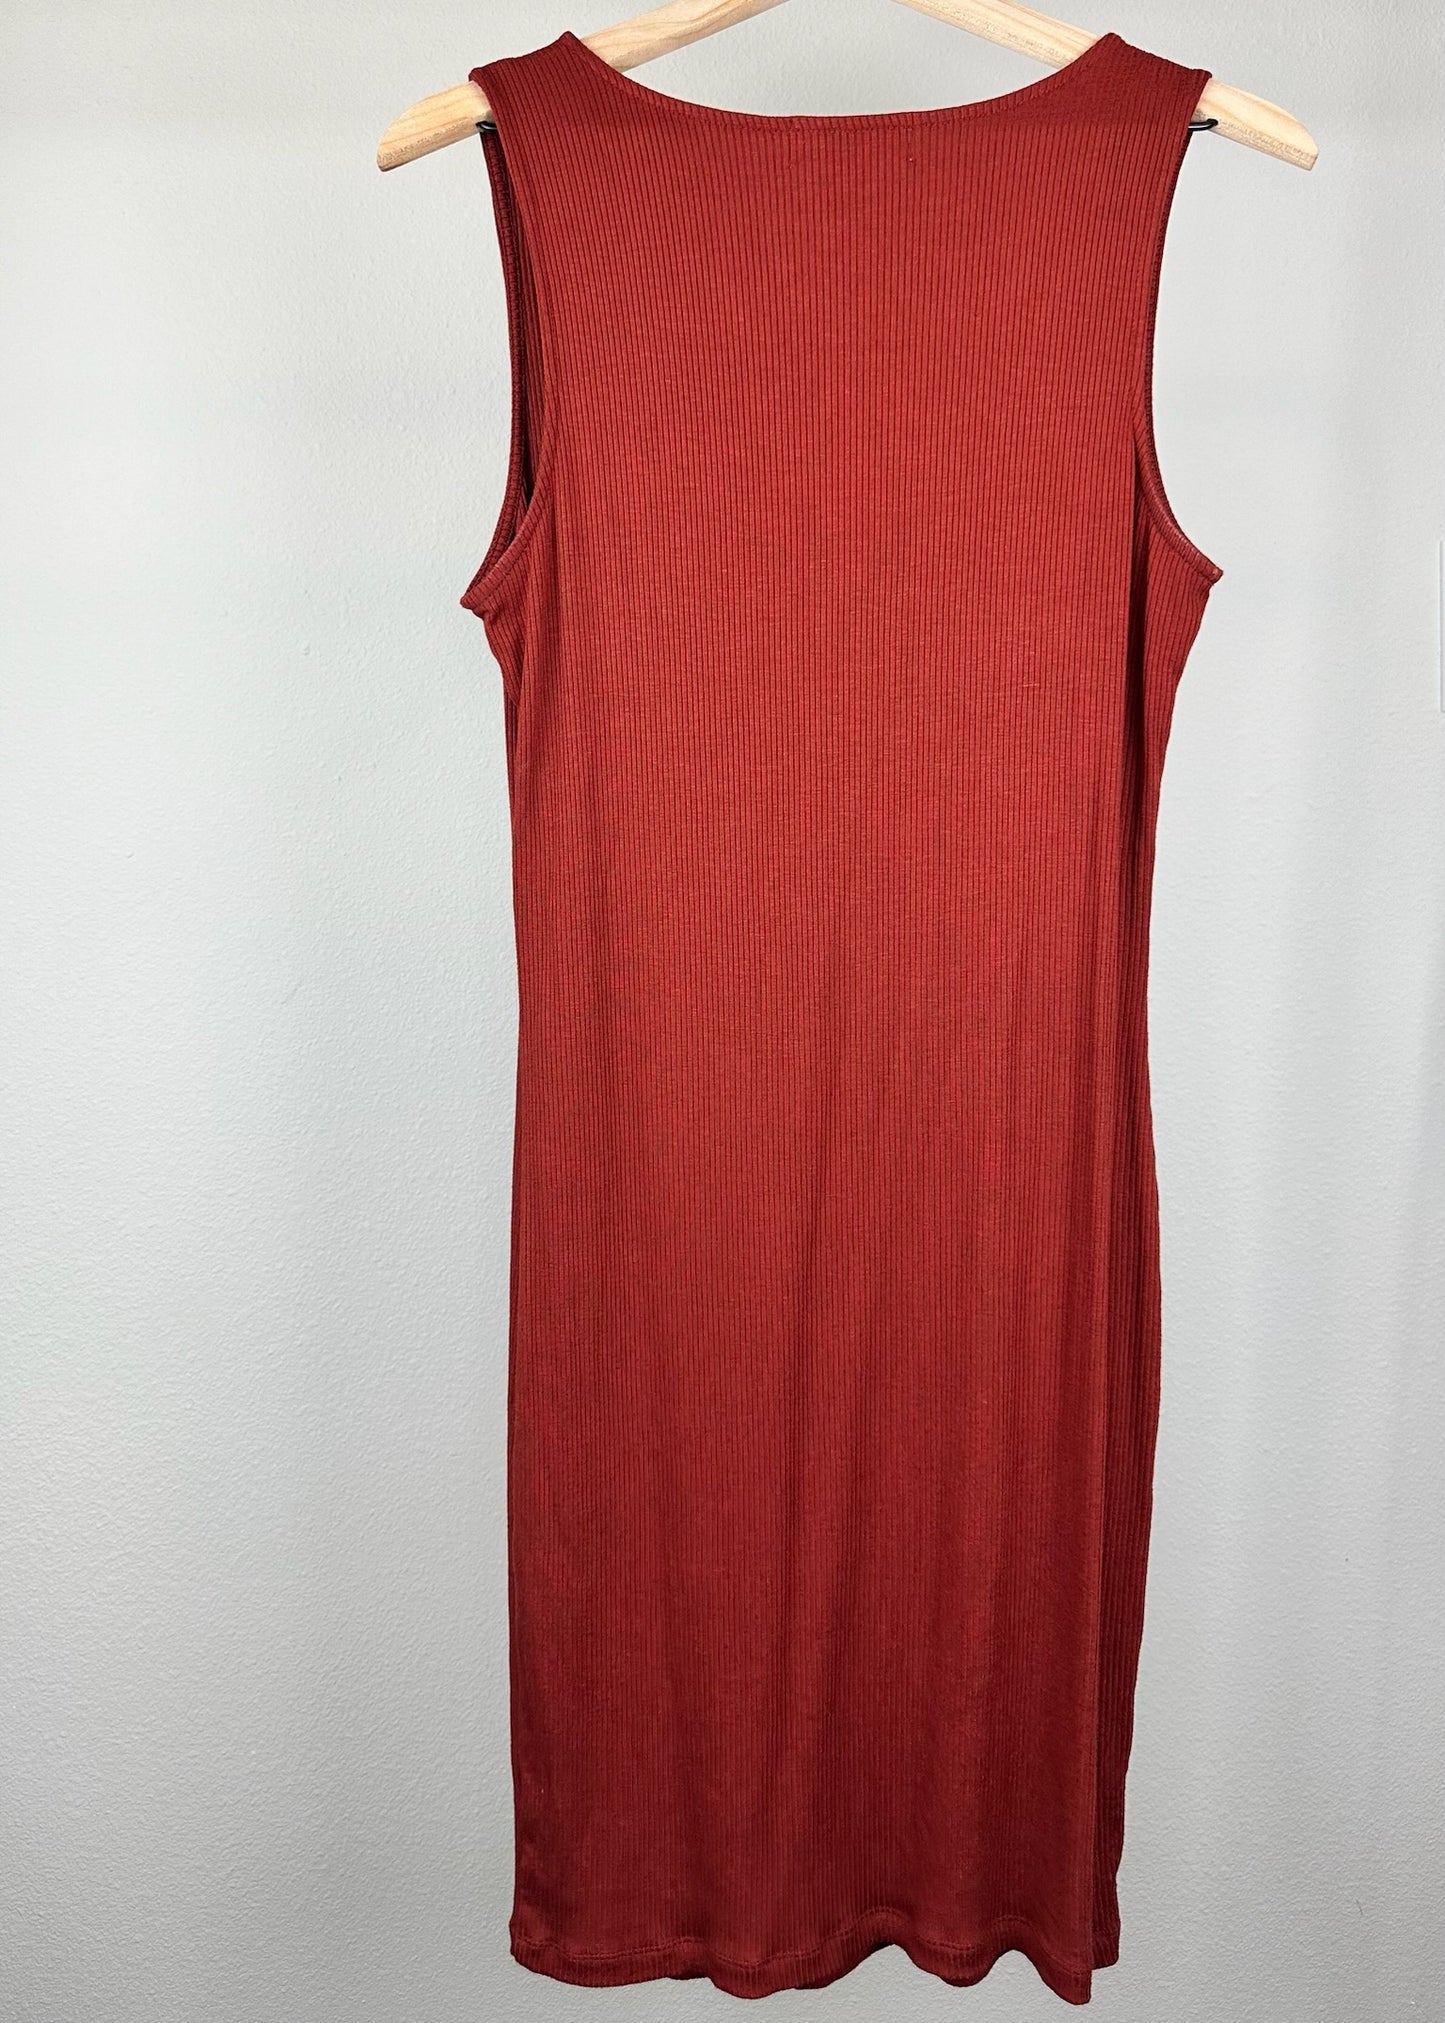 Burgundy Bodycon Dress by Forever 21